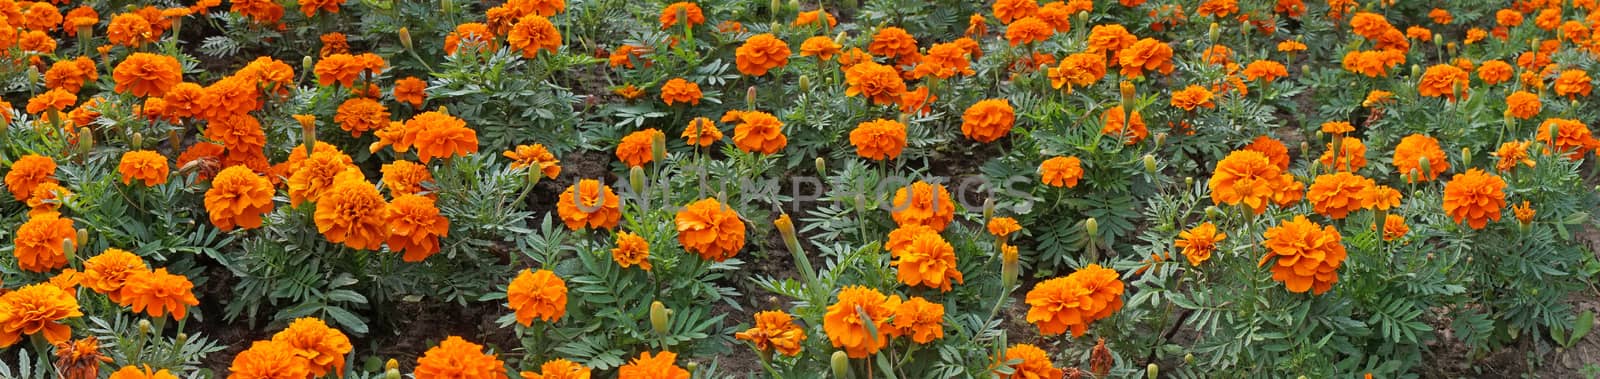 Marigolds in the flowerbed - panoramic image by Chiffanna